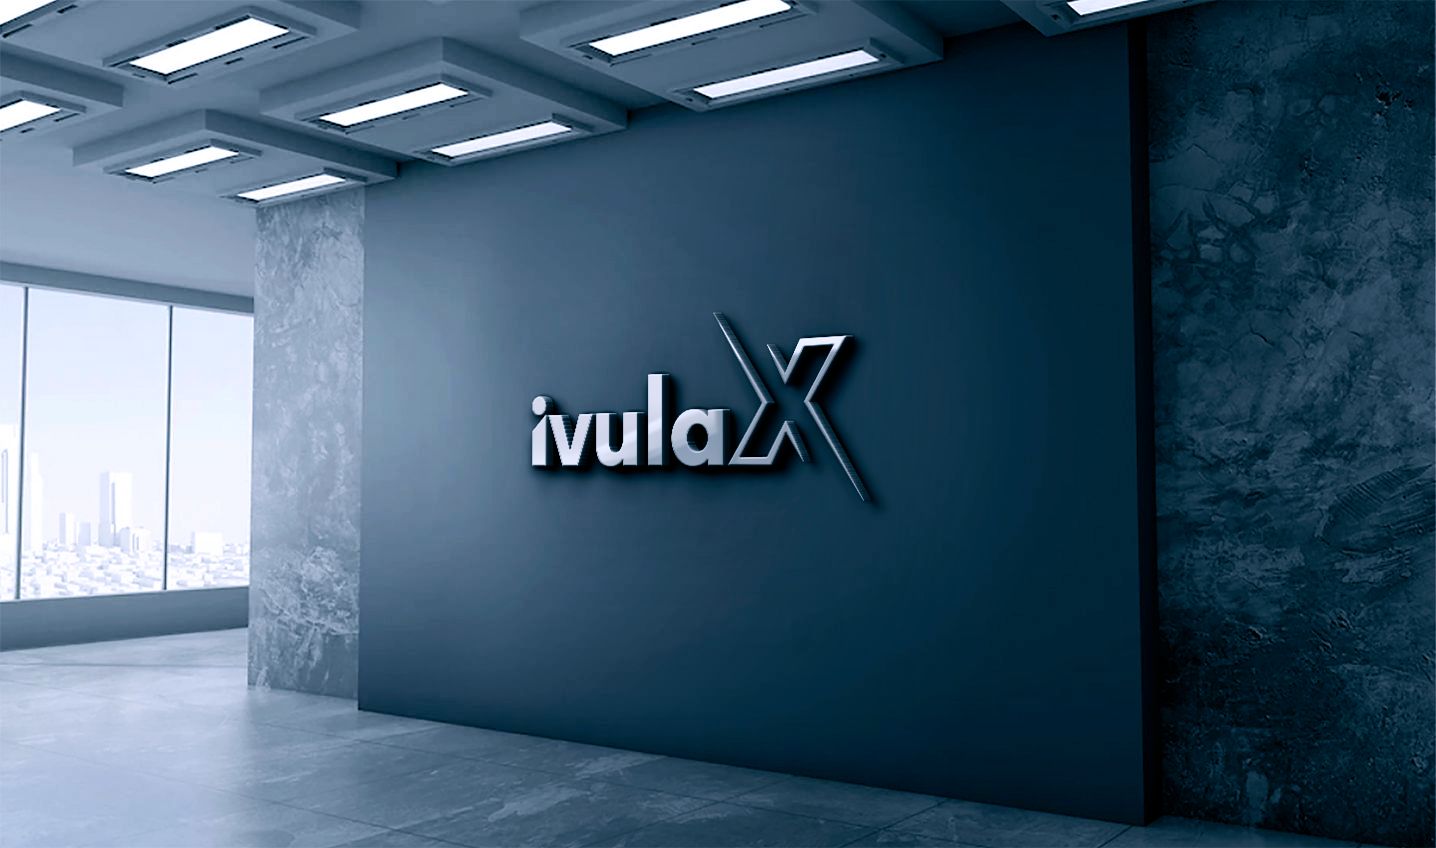 IvulaX Innovations Pvt. Ltd.: Pioneering AI Solutions for Agriculture and Beyond